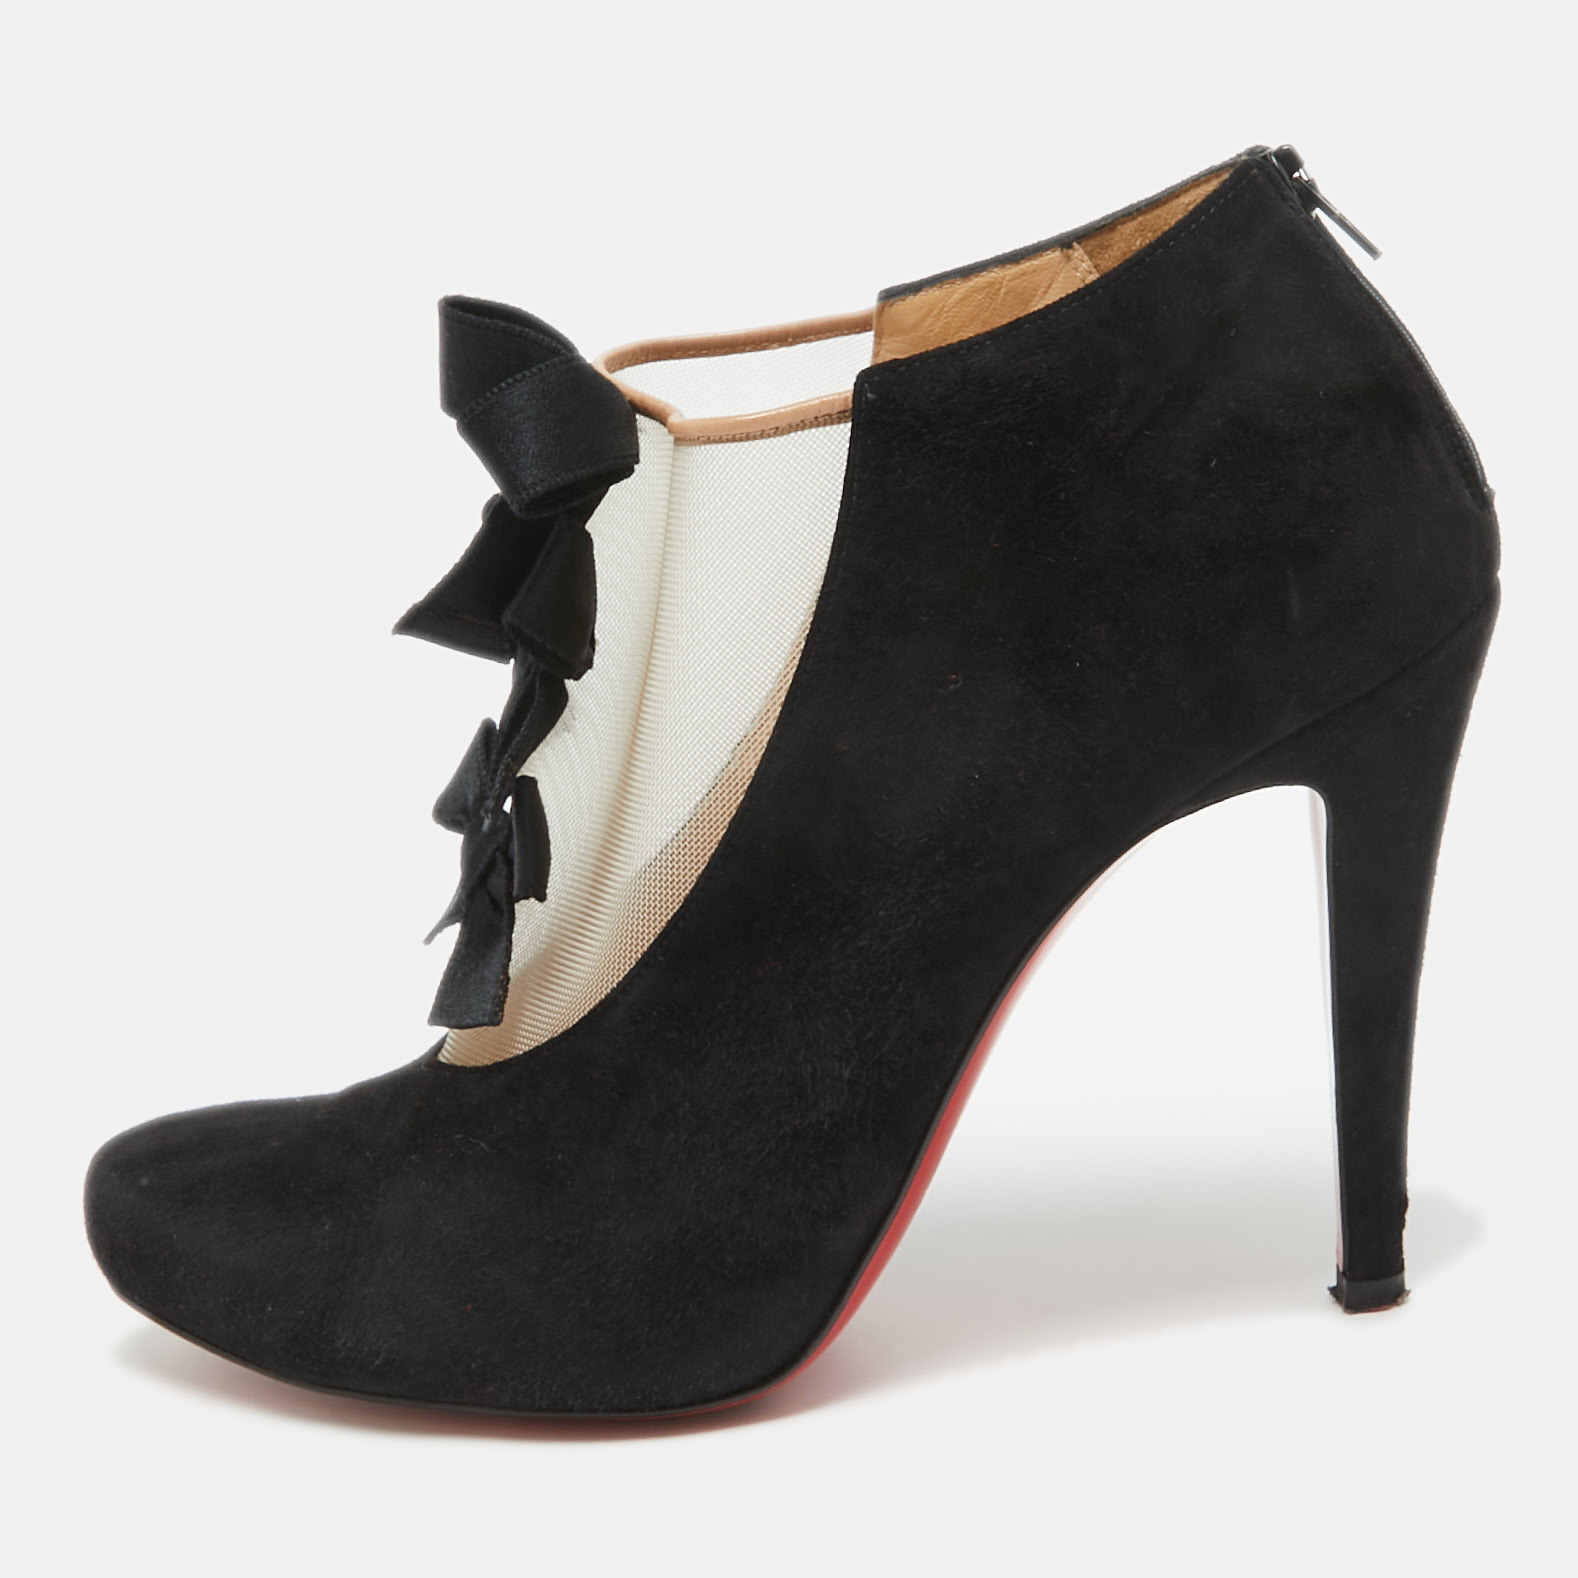 Christian louboutin black suede and mesh triple bow booties size 38.5